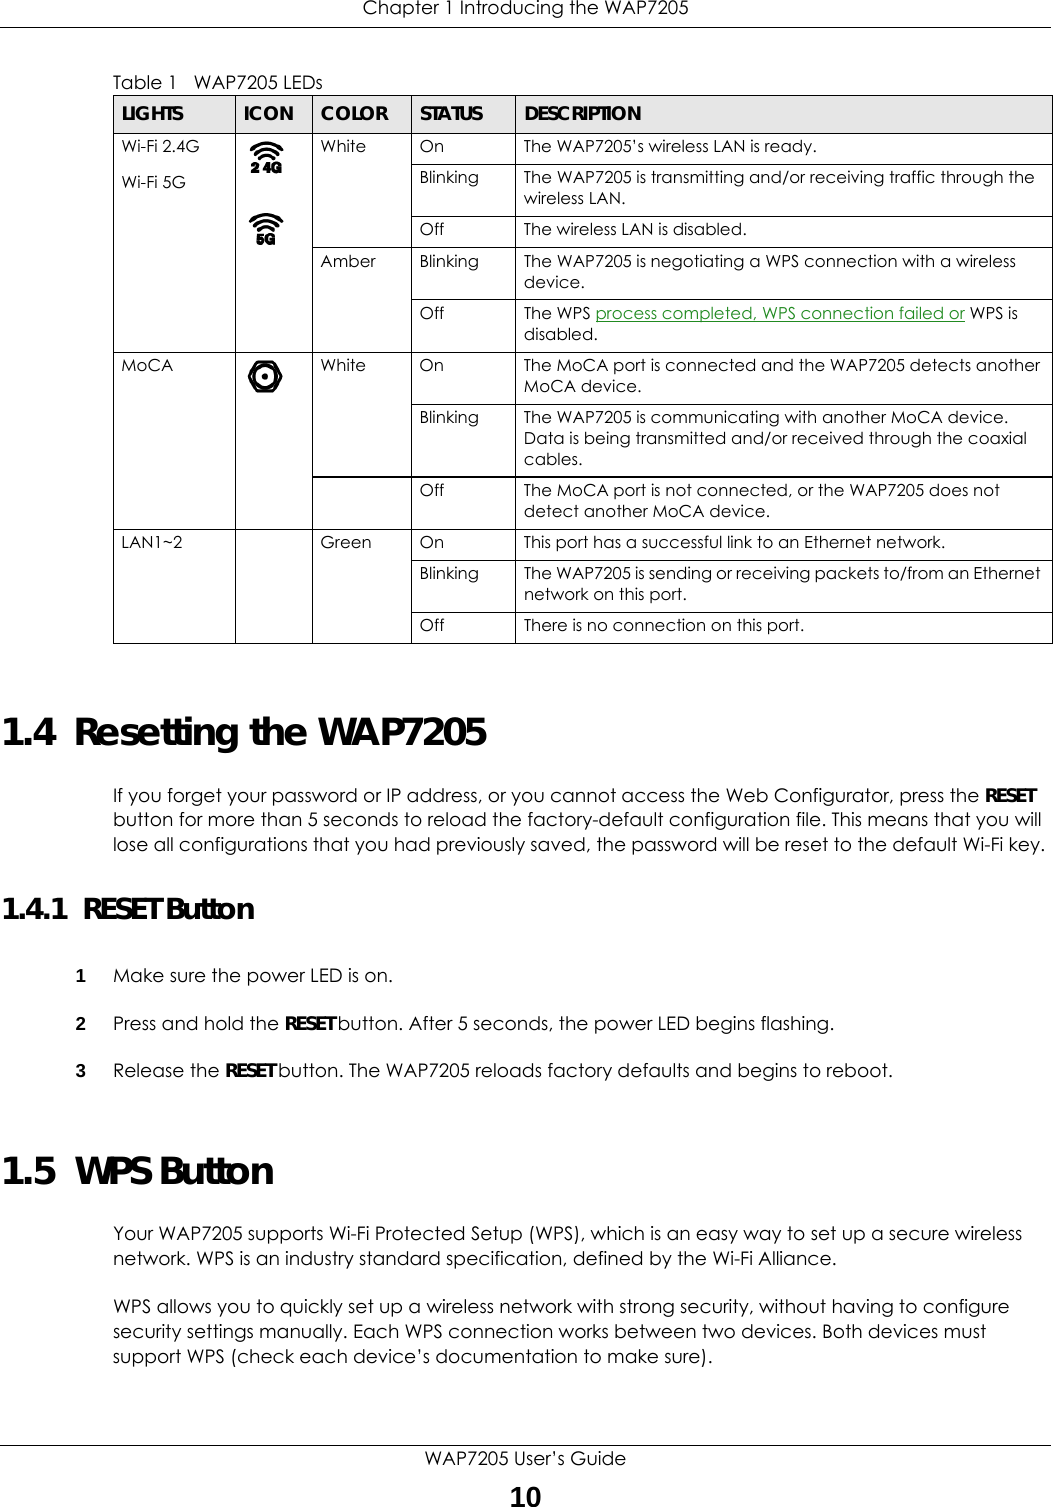 Chapter 1 Introducing the WAP7205WAP7205 User’s Guide101.4  Resetting the WAP7205If you forget your password or IP address, or you cannot access the Web Configurator, press the RESET button for more than 5 seconds to reload the factory-default configuration file. This means that you will lose all configurations that you had previously saved, the password will be reset to the default Wi-Fi key. 1.4.1  RESET Button1Make sure the power LED is on.2Press and hold the RESET button. After 5 seconds, the power LED begins flashing.3Release the RESET button. The WAP7205 reloads factory defaults and begins to reboot.1.5  WPS ButtonYour WAP7205 supports Wi-Fi Protected Setup (WPS), which is an easy way to set up a secure wireless network. WPS is an industry standard specification, defined by the Wi-Fi Alliance.WPS allows you to quickly set up a wireless network with strong security, without having to configure security settings manually. Each WPS connection works between two devices. Both devices must support WPS (check each device’s documentation to make sure).Wi-Fi 2.4G Wi-Fi 5GWhite On The WAP7205’s wireless LAN is ready. Blinking The WAP7205 is transmitting and/or receiving traffic through the wireless LAN.Off The wireless LAN is disabled.Amber Blinking The WAP7205 is negotiating a WPS connection with a wireless device. Off The WPS process completed, WPS connection failed or WPS is disabled.MoCA White On The MoCA port is connected and the WAP7205 detects another MoCA device. Blinking The WAP7205 is communicating with another MoCA device. Data is being transmitted and/or received through the coaxial cables.Off The MoCA port is not connected, or the WAP7205 does not detect another MoCA device.LAN1~2 Green On This port has a successful link to an Ethernet network.Blinking The WAP7205 is sending or receiving packets to/from an Ethernet network on this port.Off There is no connection on this port.Table 1   WAP7205 LEDsLIGHTS ICON COLOR STATUS DESCRIPTION